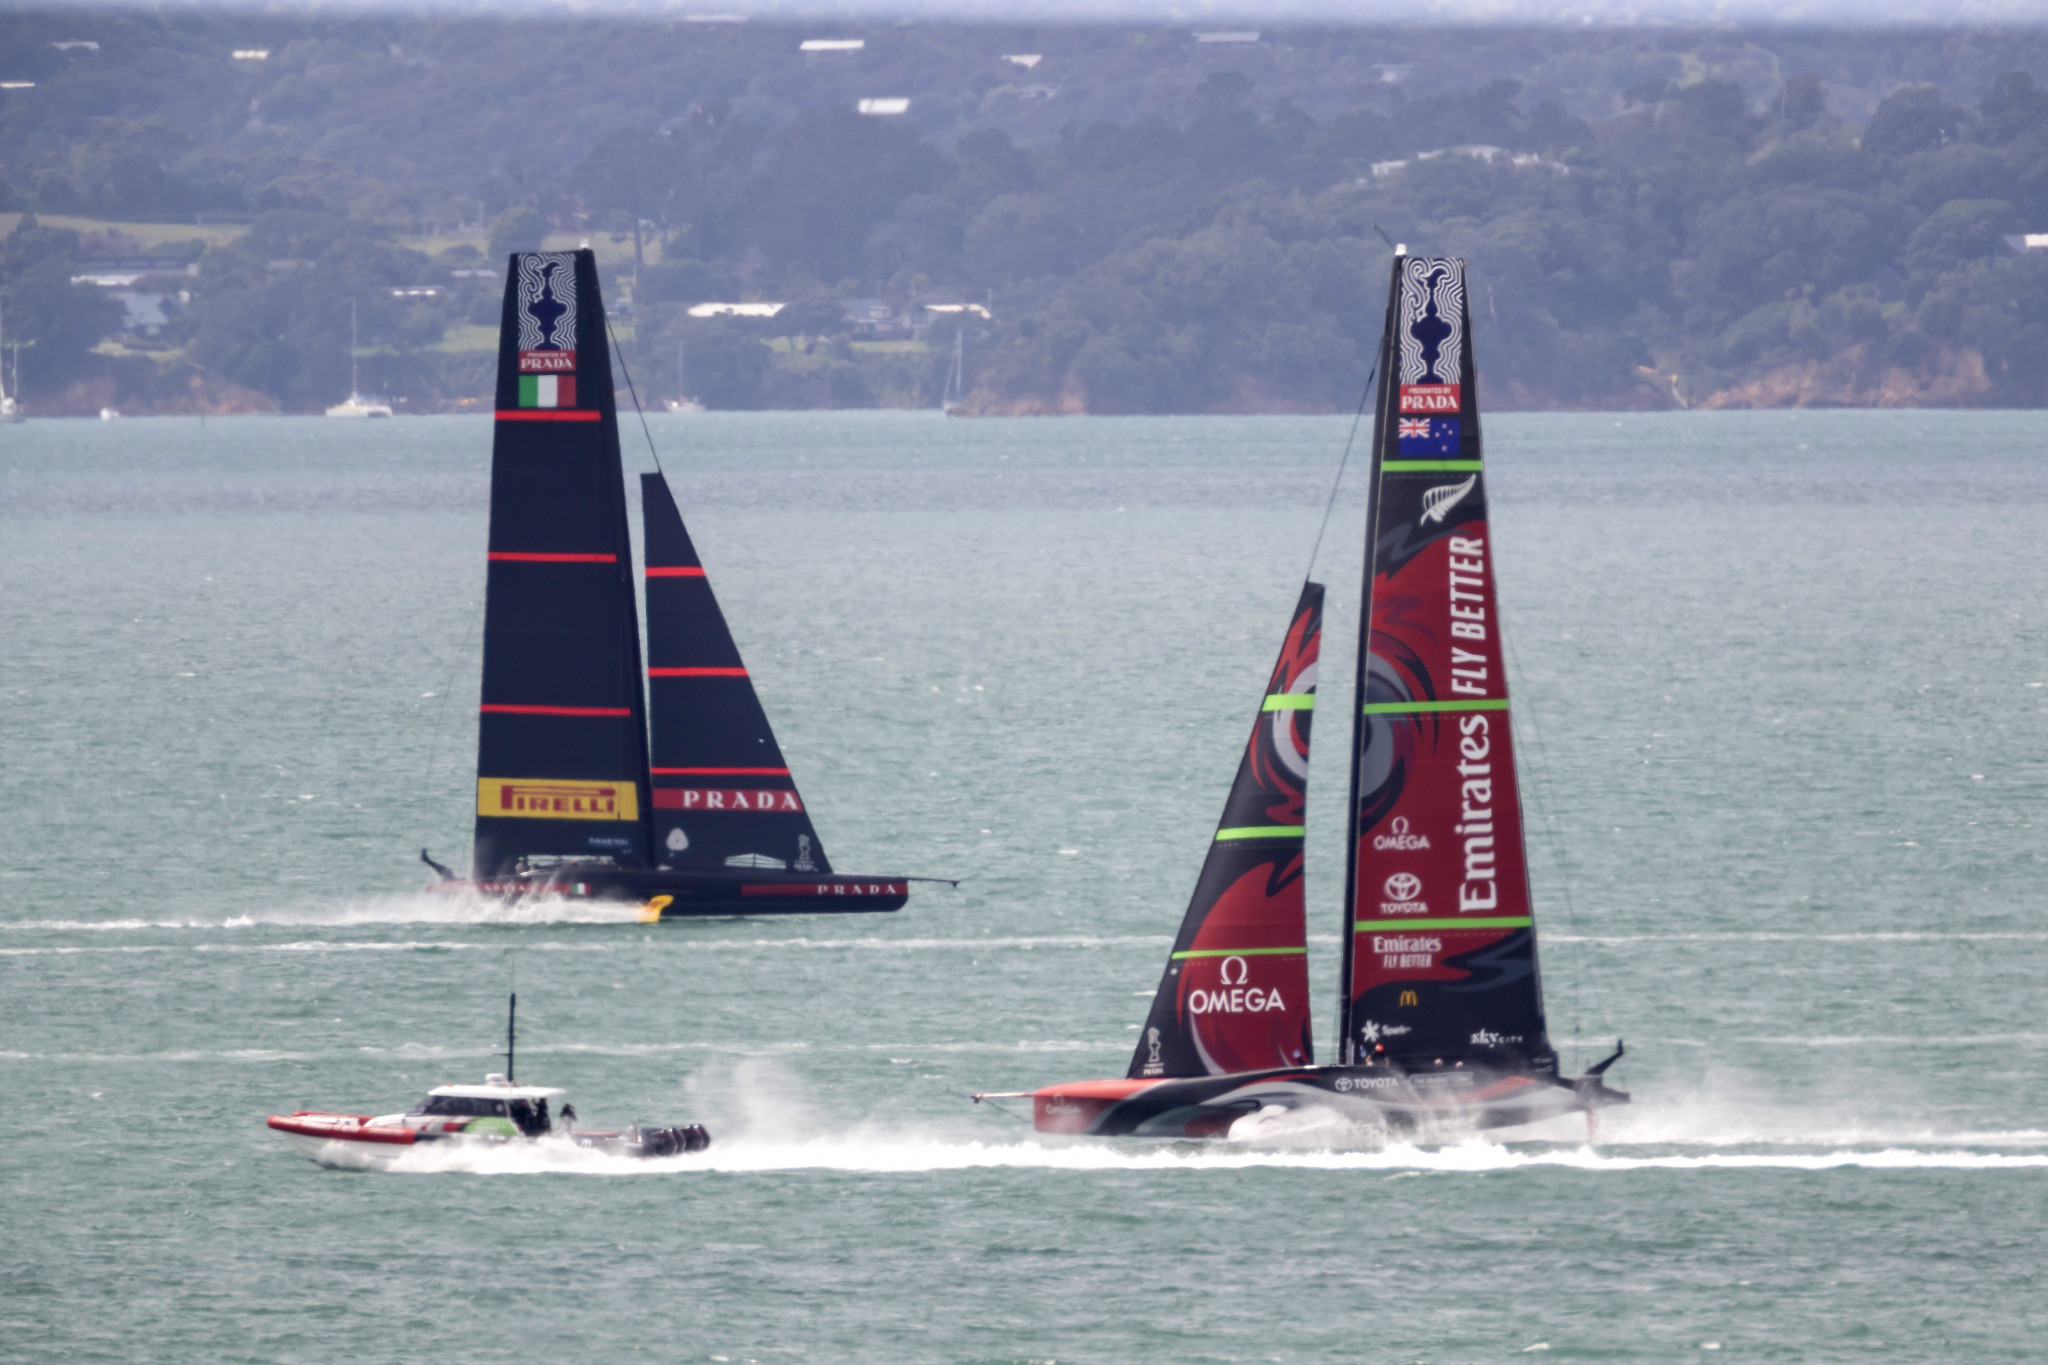 Team New Zealand to go up against Luna Rossa in America's Cup